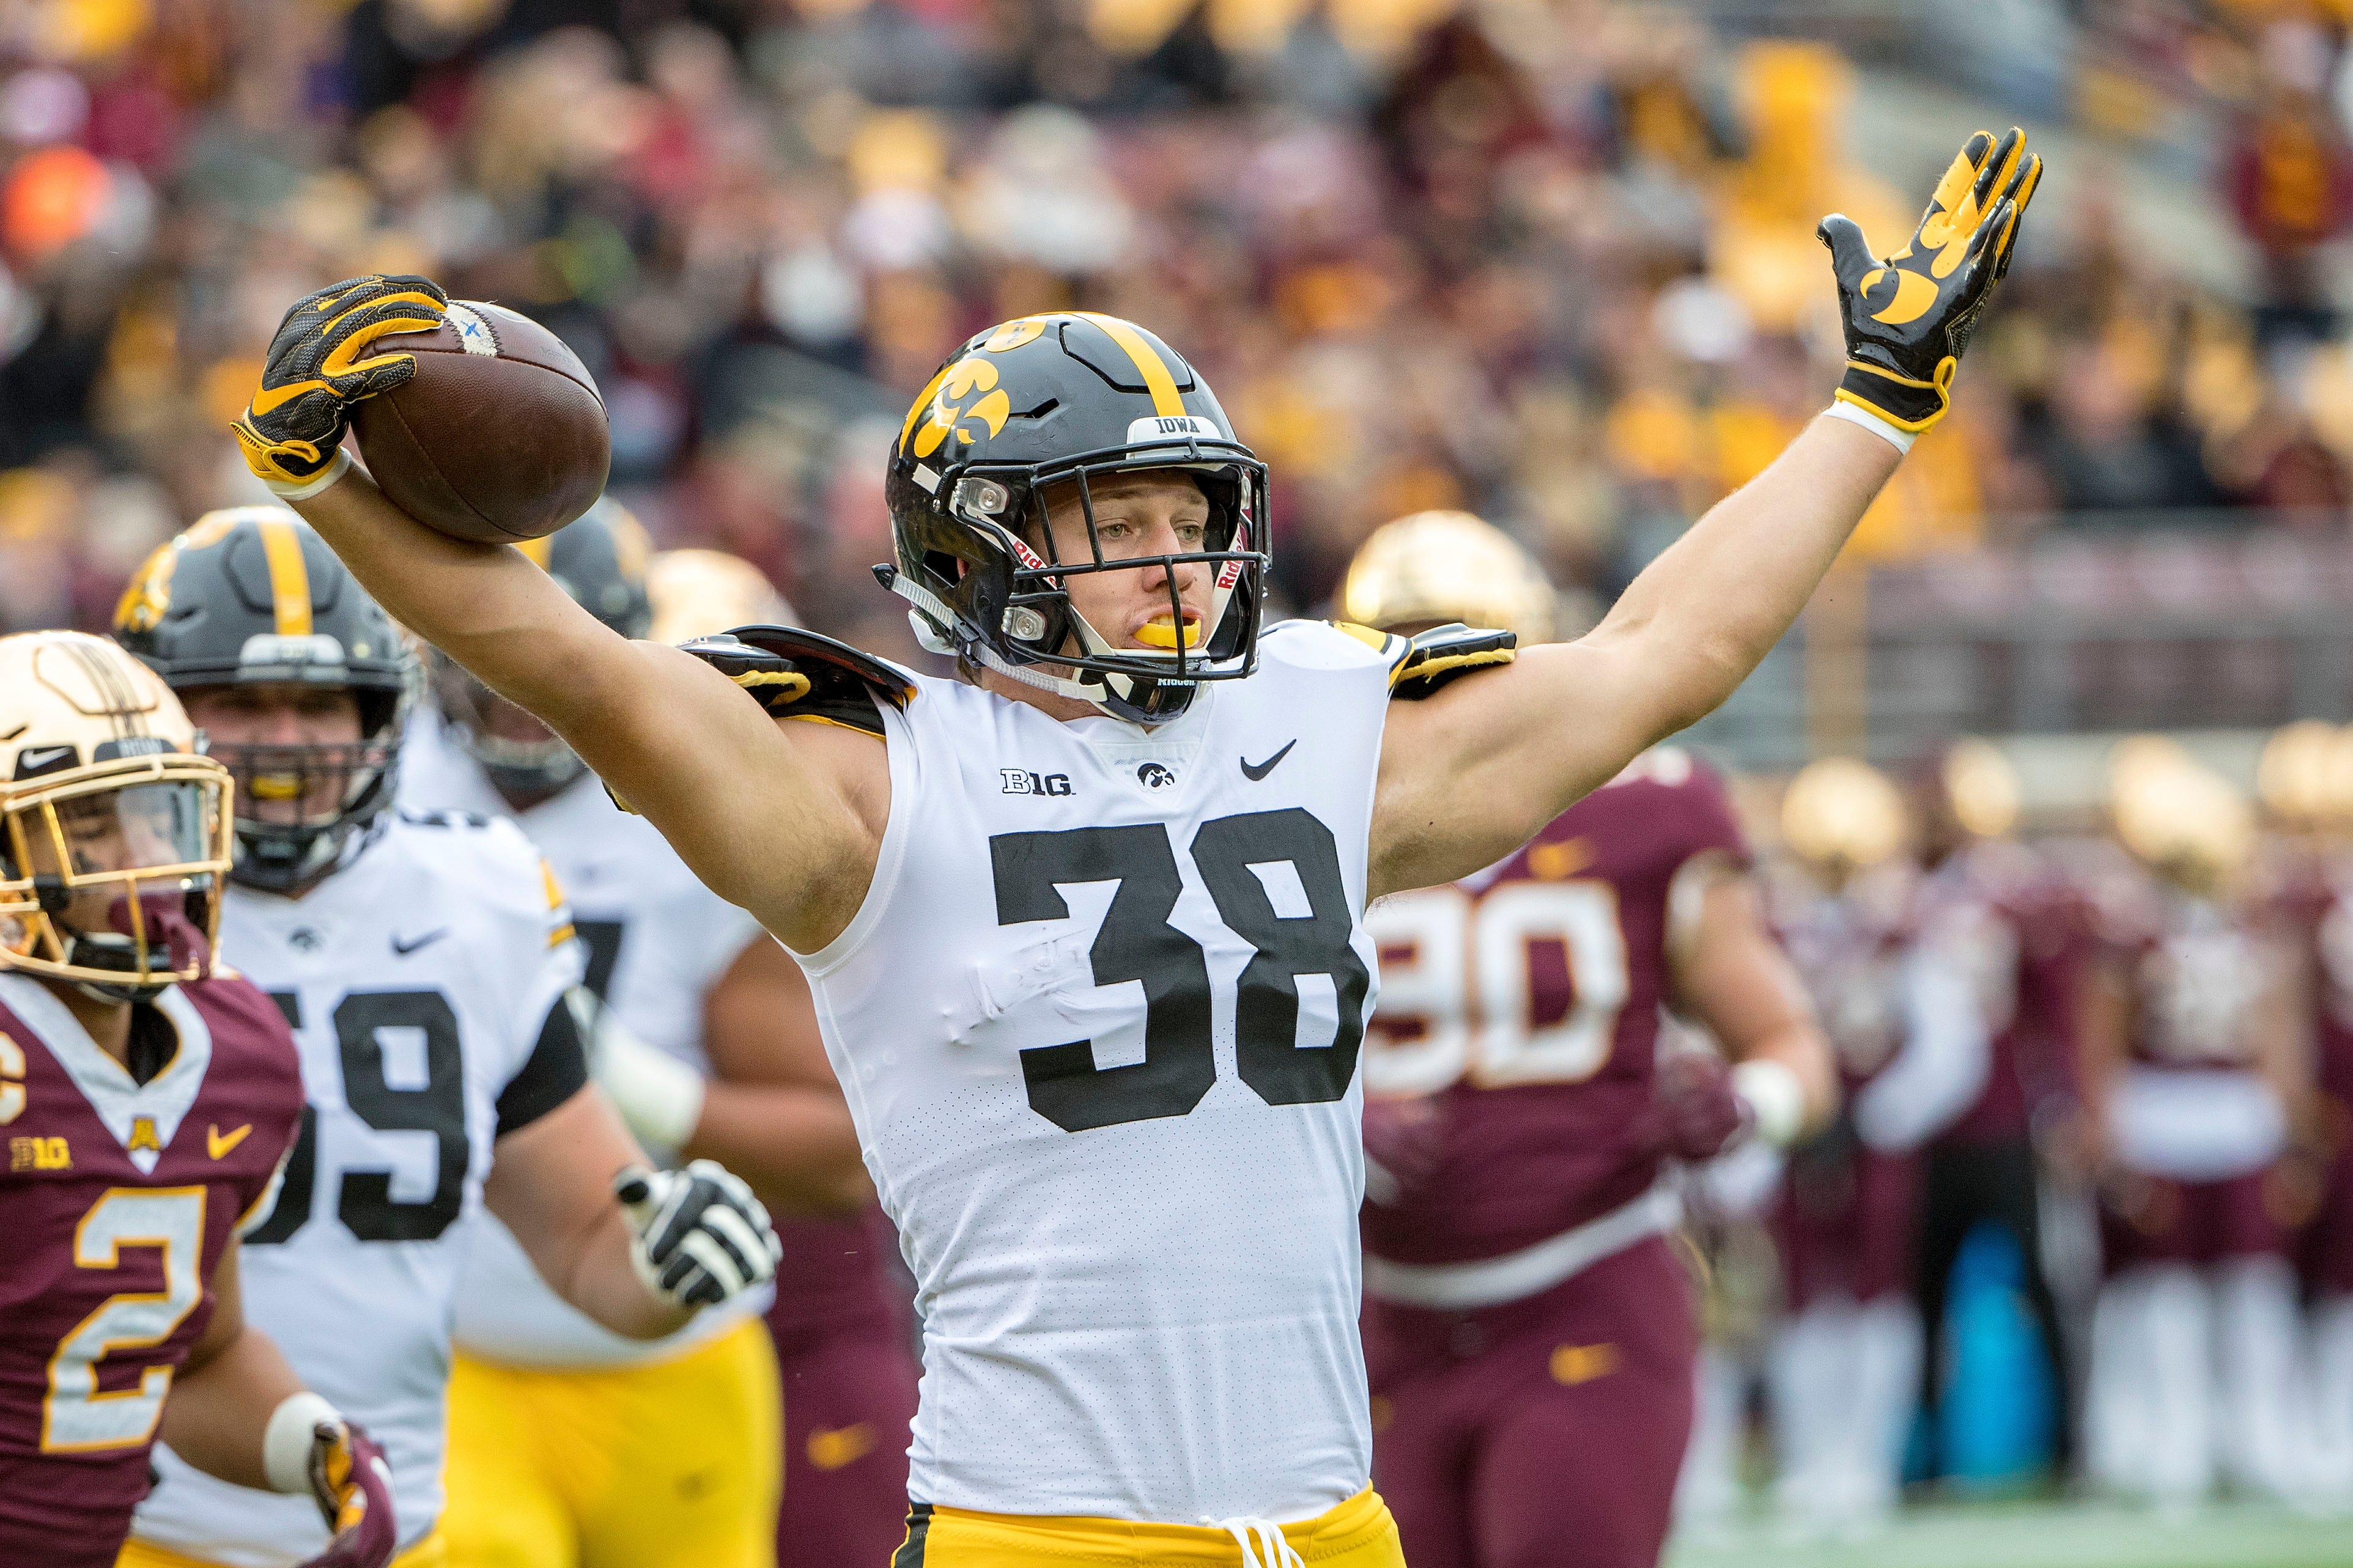 Oct 6, 2018; Minneapolis, MN, USA; Iowa Hawkeyes tight end T.J. Hockenson (38) celebrates after scoring a touchdown against the Minnesota Golden Gophers in the first quarter at TCF Bank Stadium. Mandatory Credit: Jesse Johnson-USA TODAY Sports